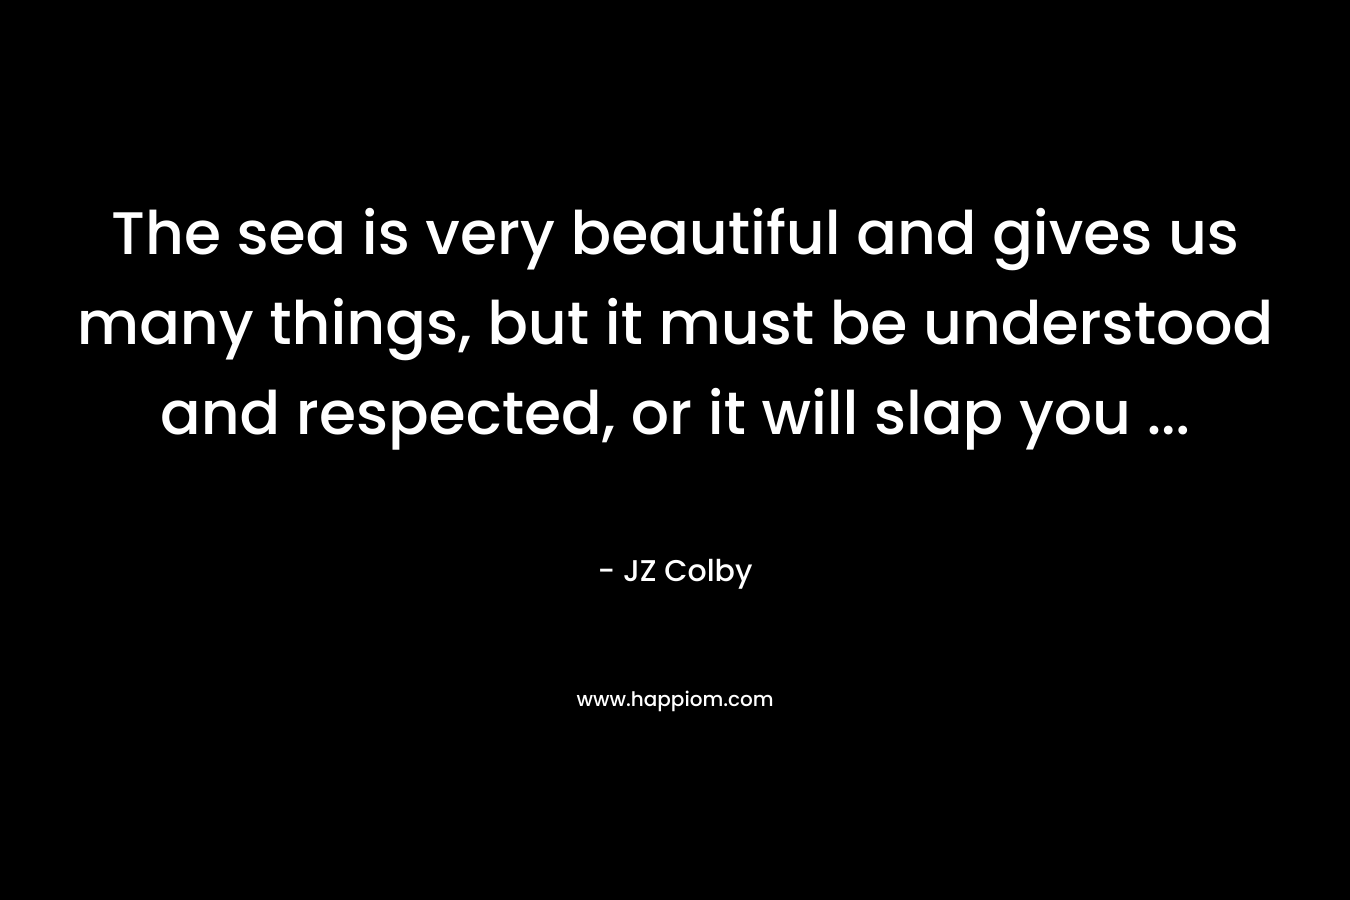 The sea is very beautiful and gives us many things, but it must be understood and respected, or it will slap you ...